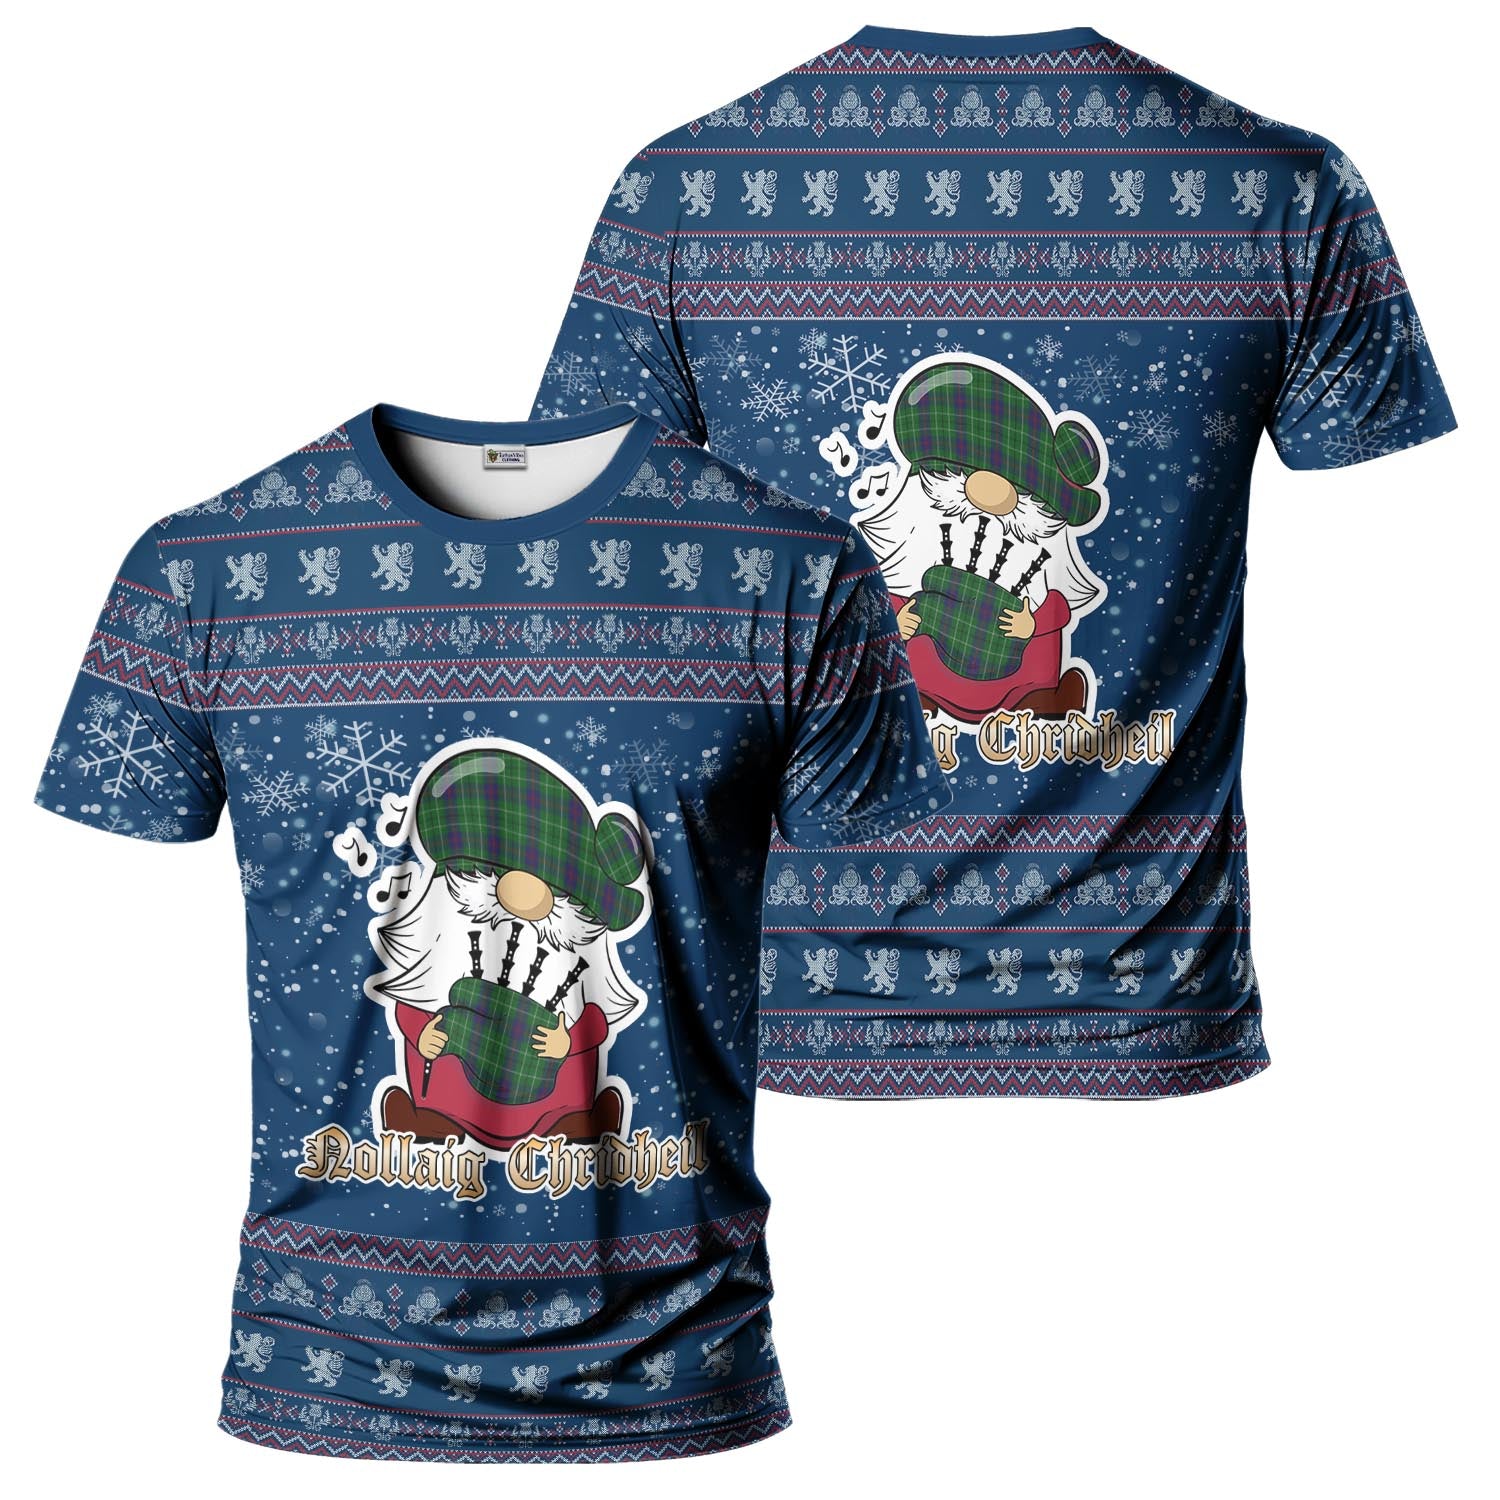 Duncan Clan Christmas Family T-Shirt with Funny Gnome Playing Bagpipes Kid's Shirt Blue - Tartanvibesclothing